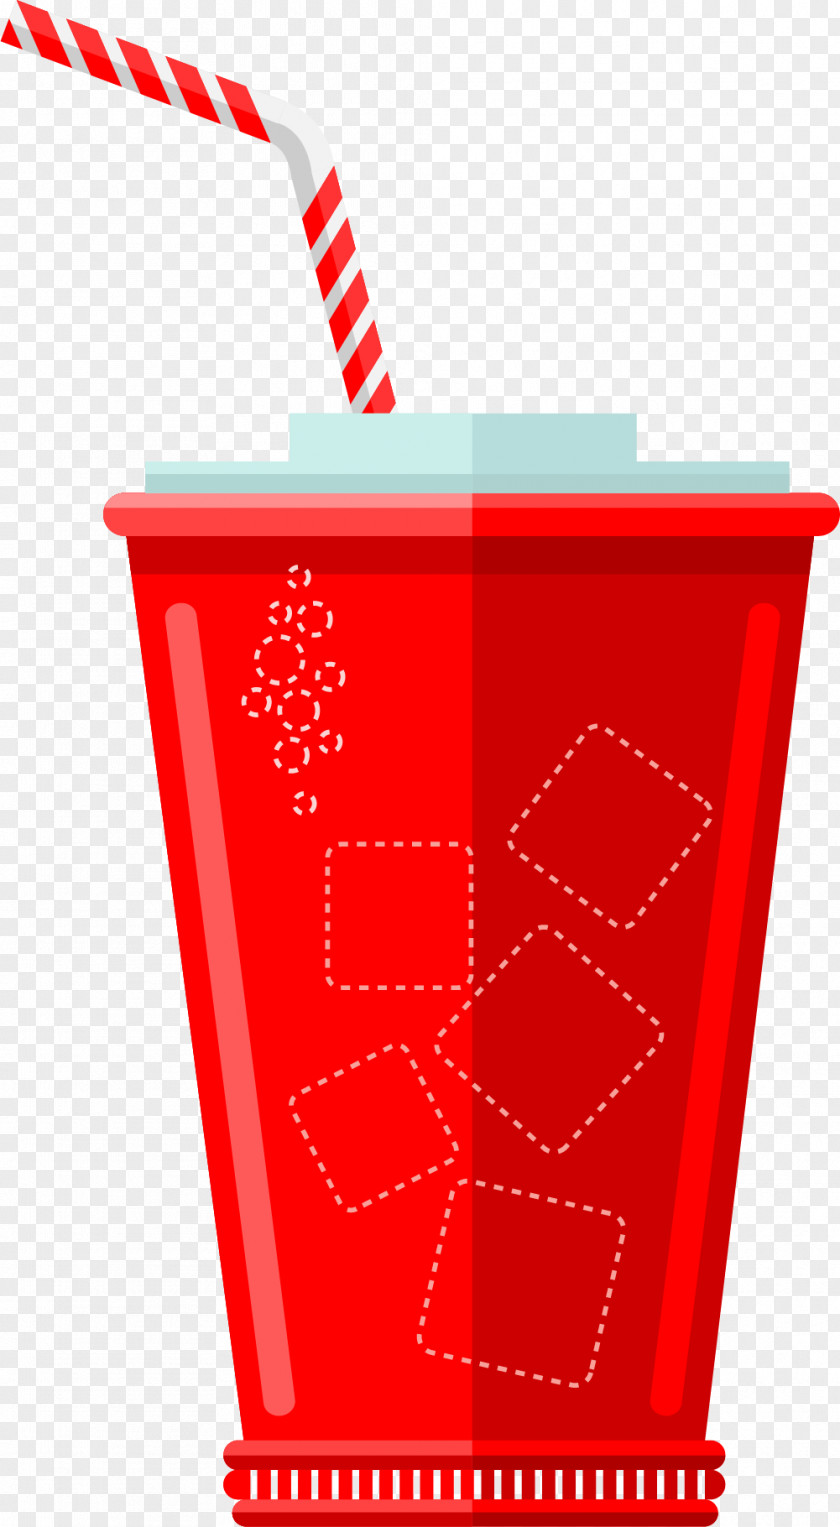 Quick Restaurant Beverage Cup Soft Drink Coca-Cola Fast Food Carbonated PNG